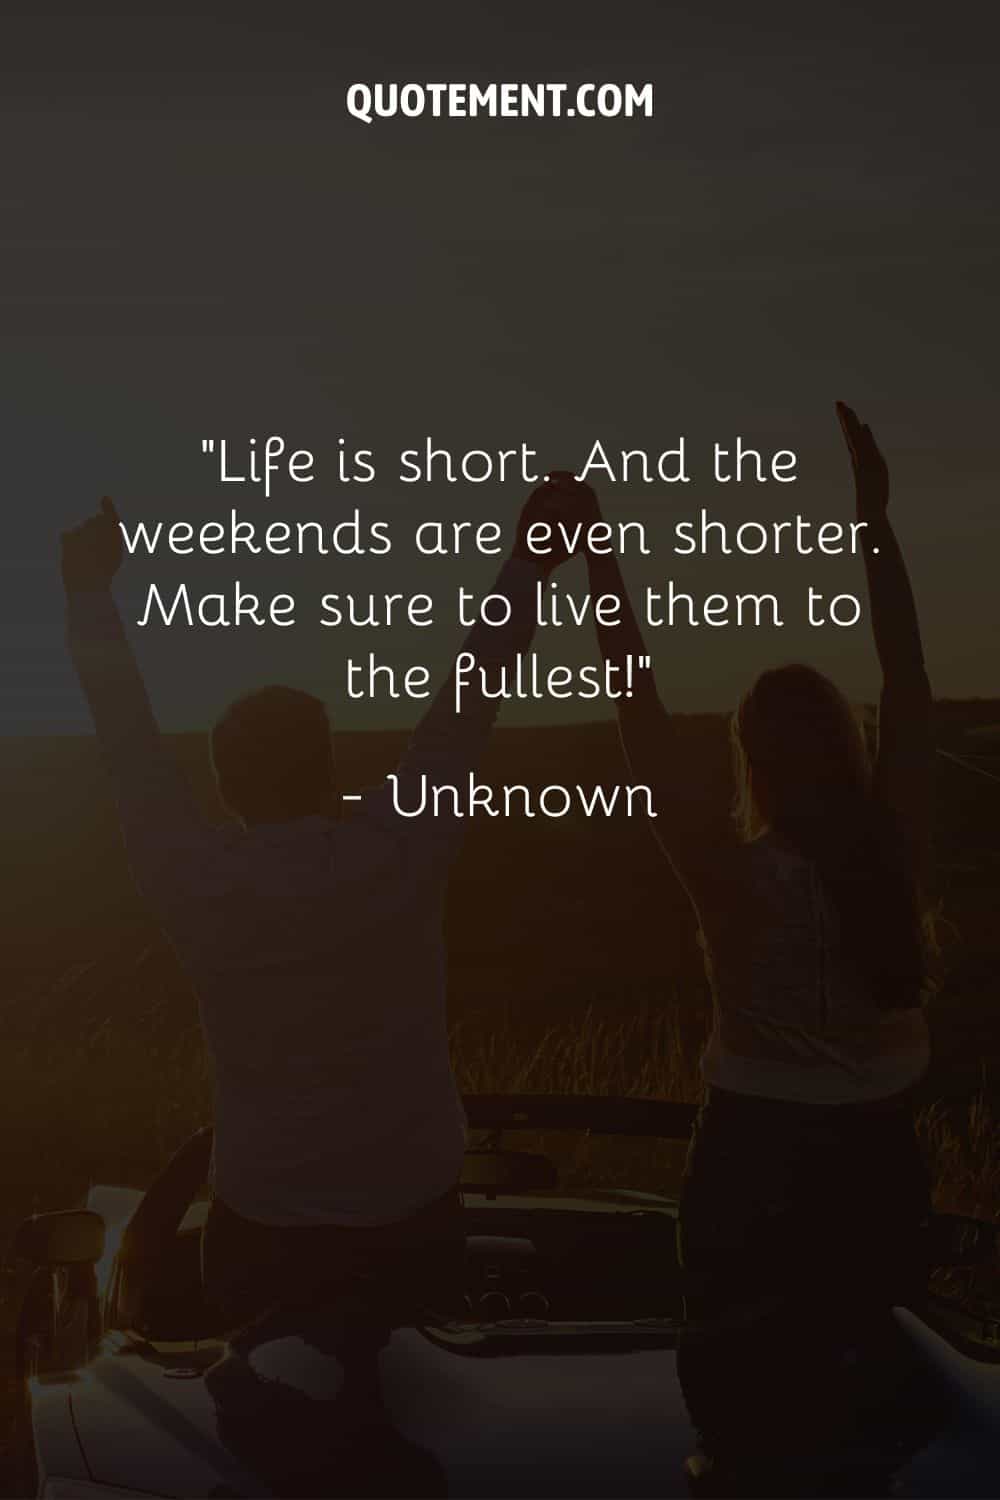 Life is short. And the weekends are even shorter. Make sure to live them to the fullest